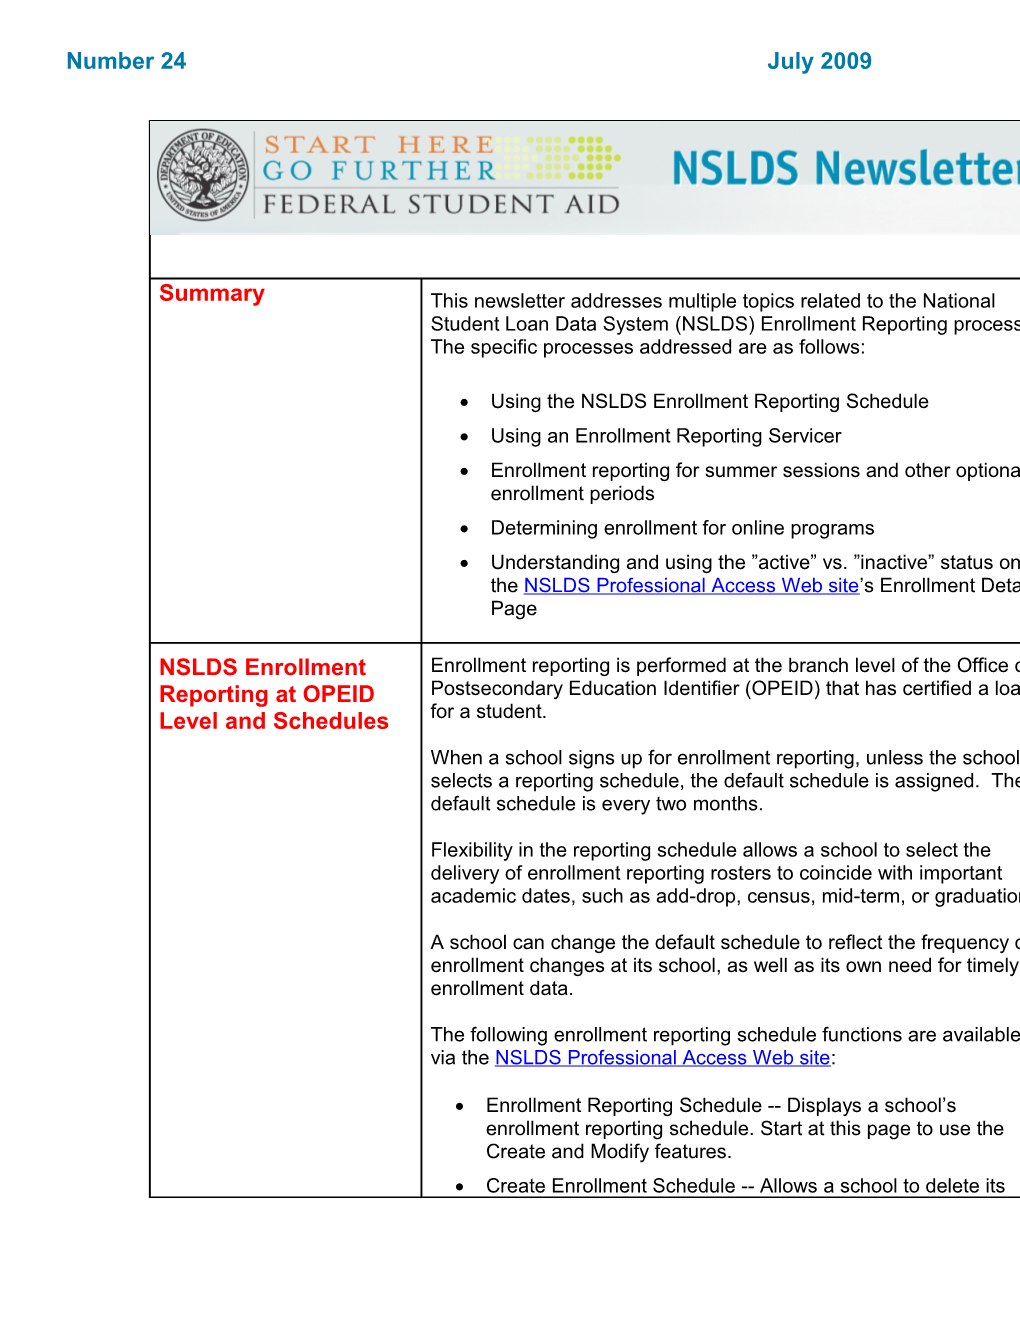 Using the NSLDS Enrollment Reporting Schedule